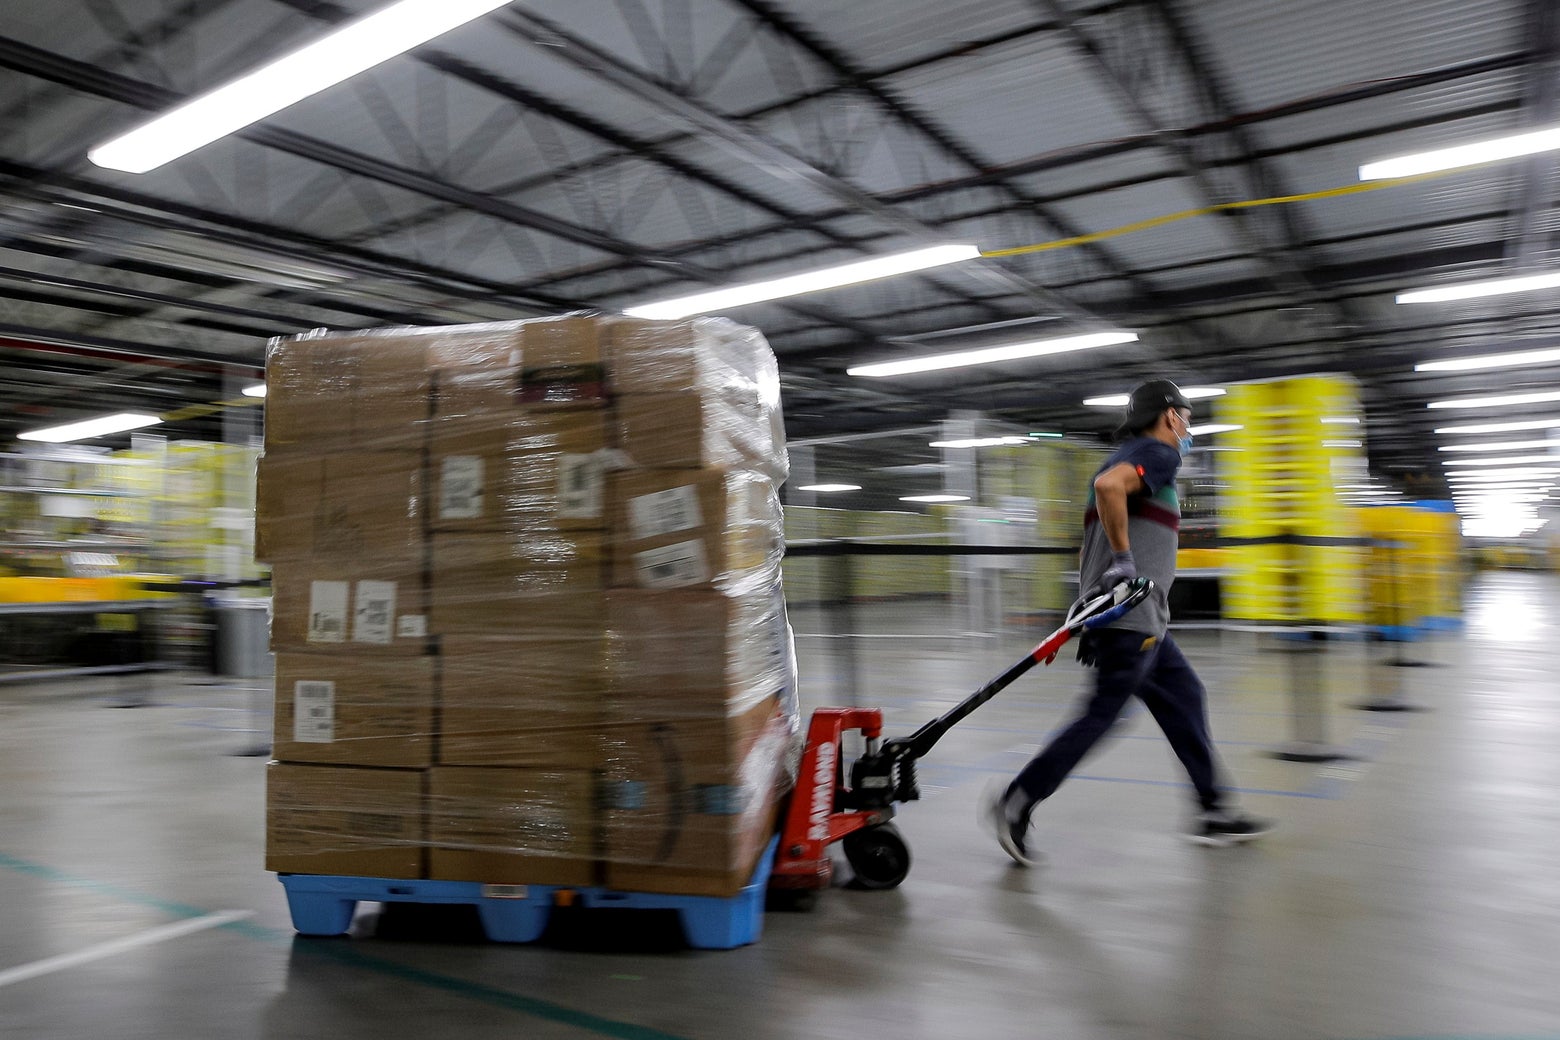 The Amazon Warehouse Union Vote in Alabama Is a Big Deal